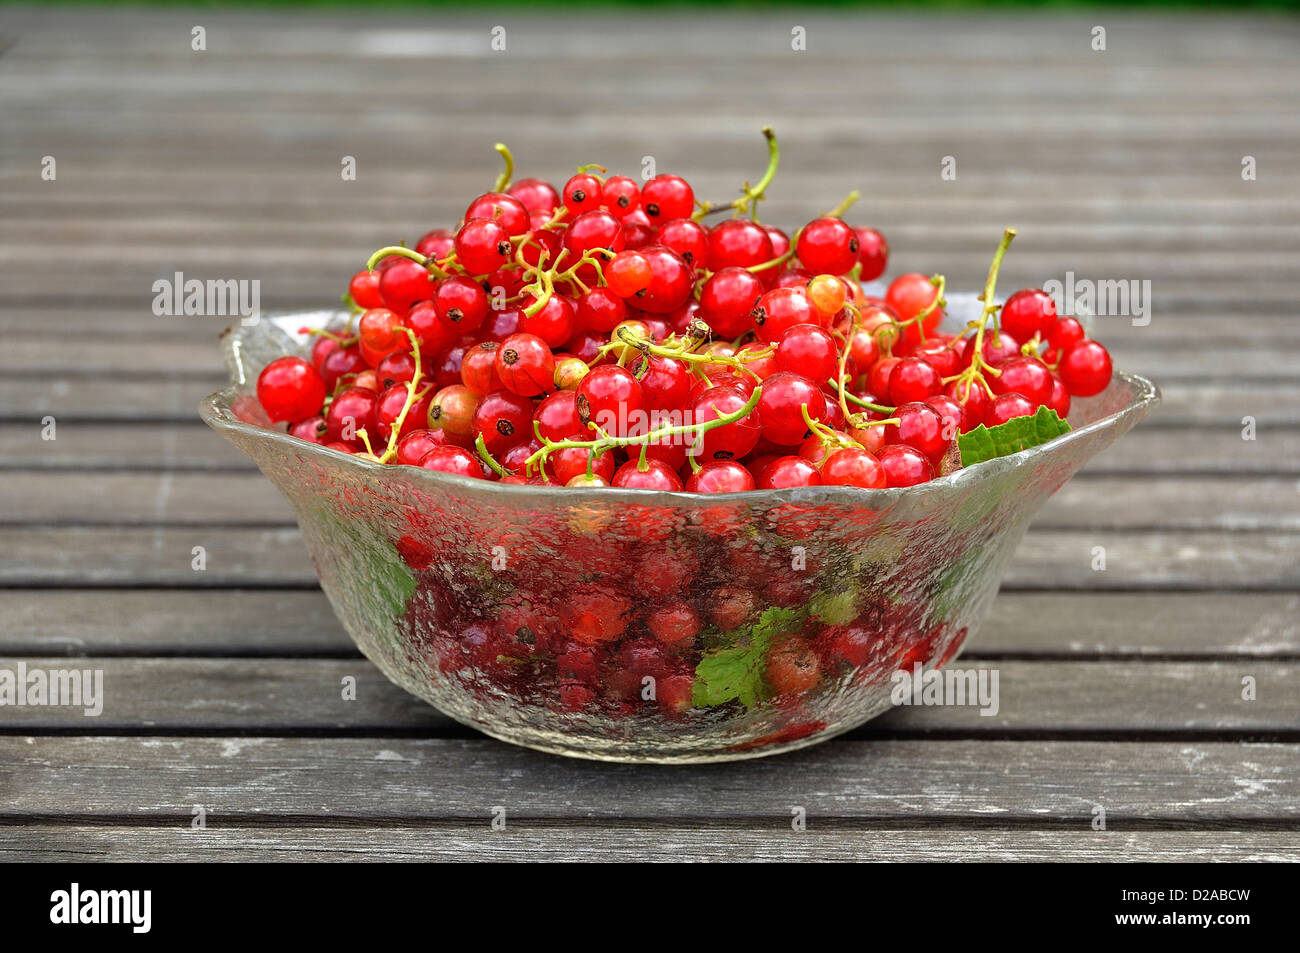 Crop of the redcurrants (Ribes rubrum) of the garden, in june. 'Potager de Suzanne', Le Pas, Mayenne, Loire country, France. Stock Photo